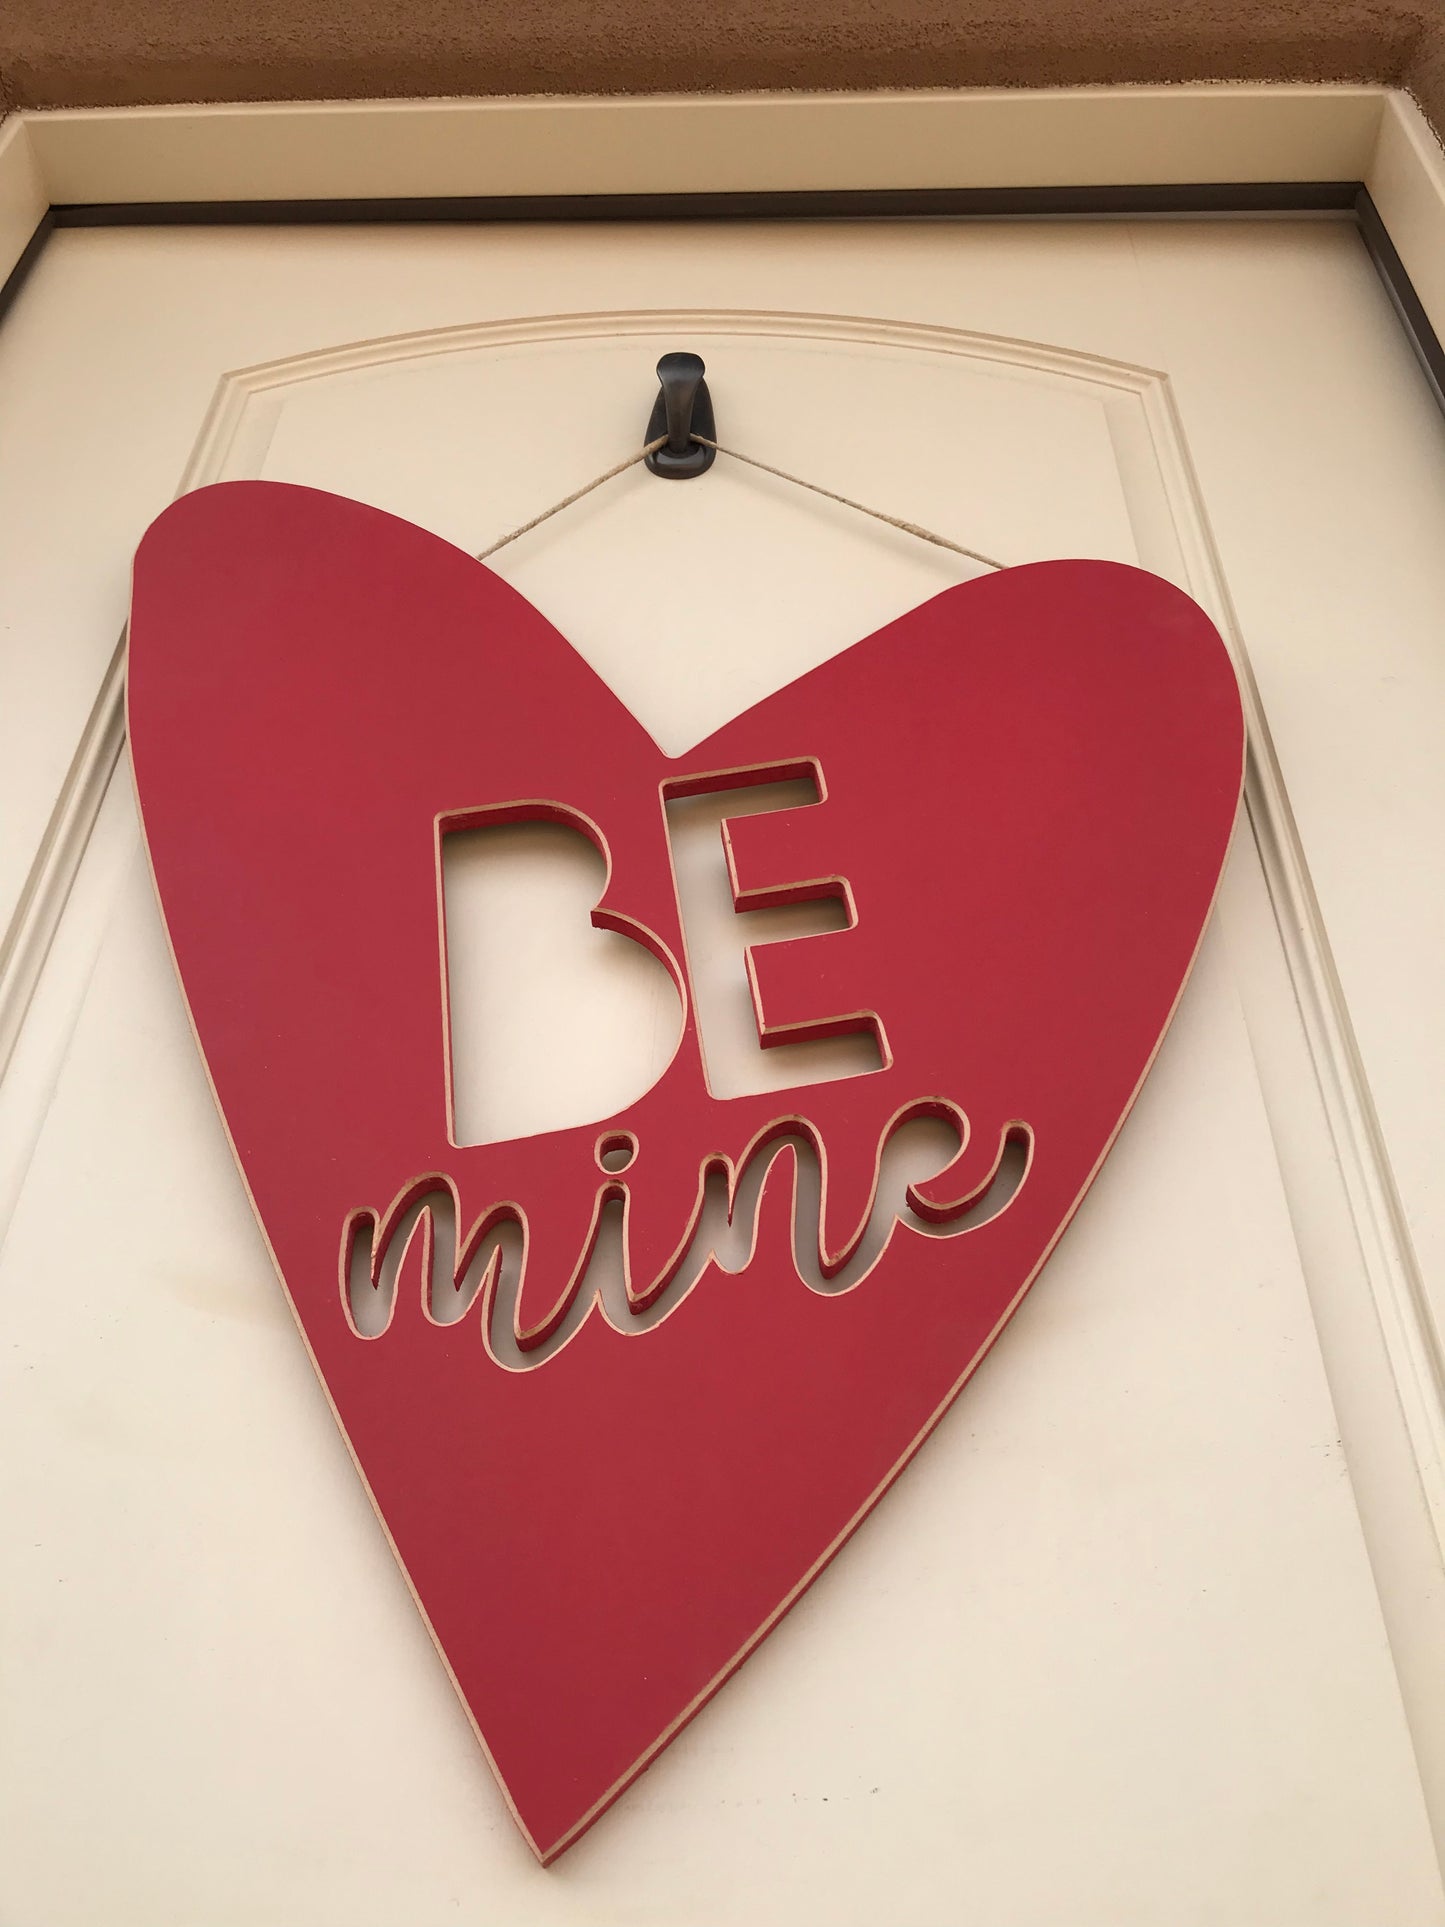 Romantic 'Be Mine' Heart Door Sign – Bold Red Valentine's Day Decor